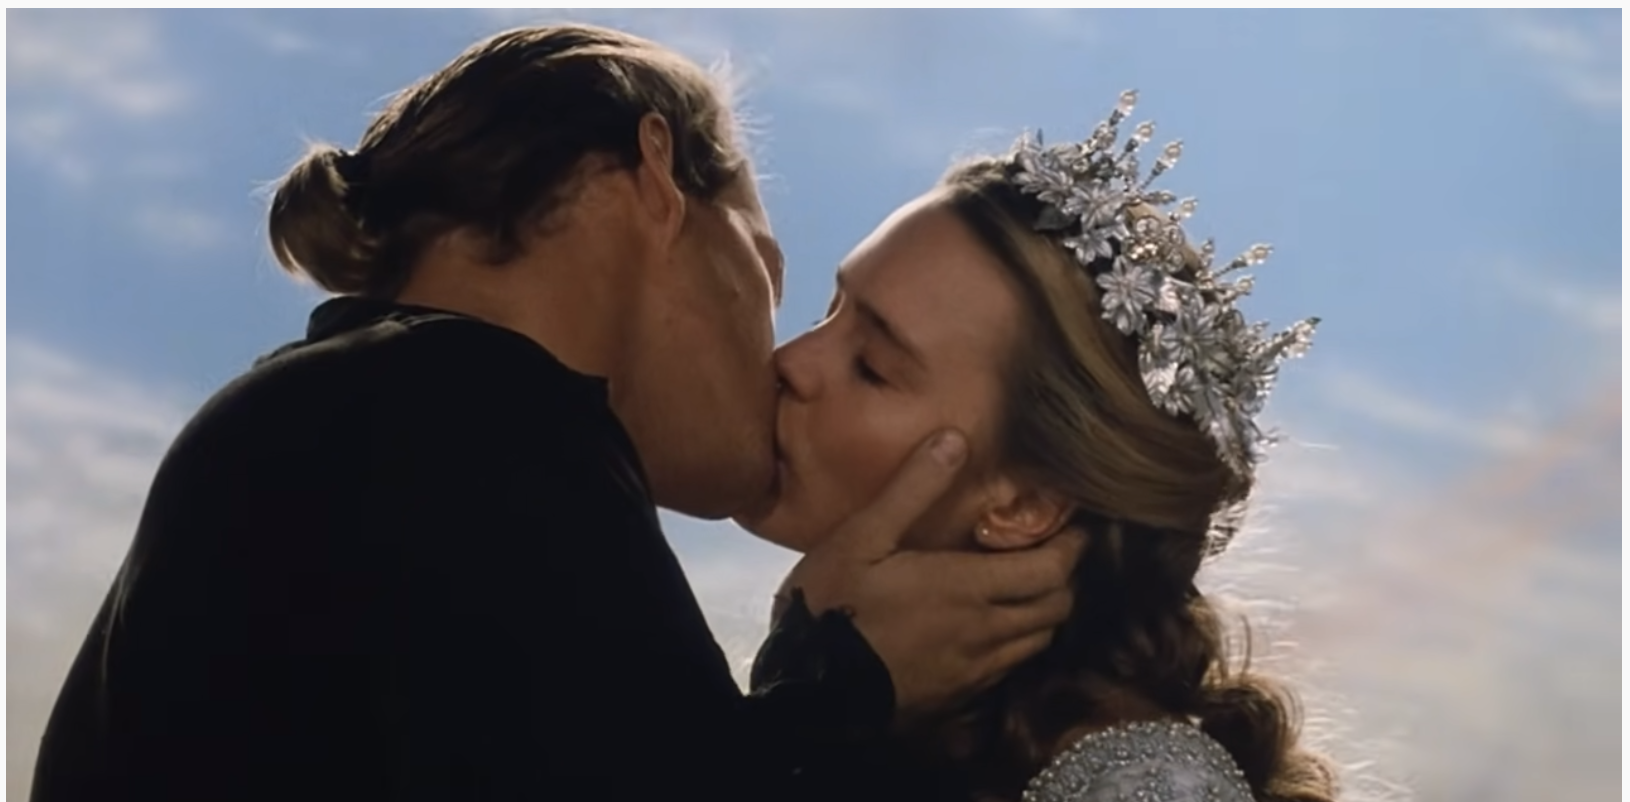 Cary Elwes, as Westley, pictured left, in all black, holds the face and is kissing Robin Wright, as Buttercup, pictured right. Wright wears a silver crown and a silver dress. Top image screenshot from the YouTube trailer.